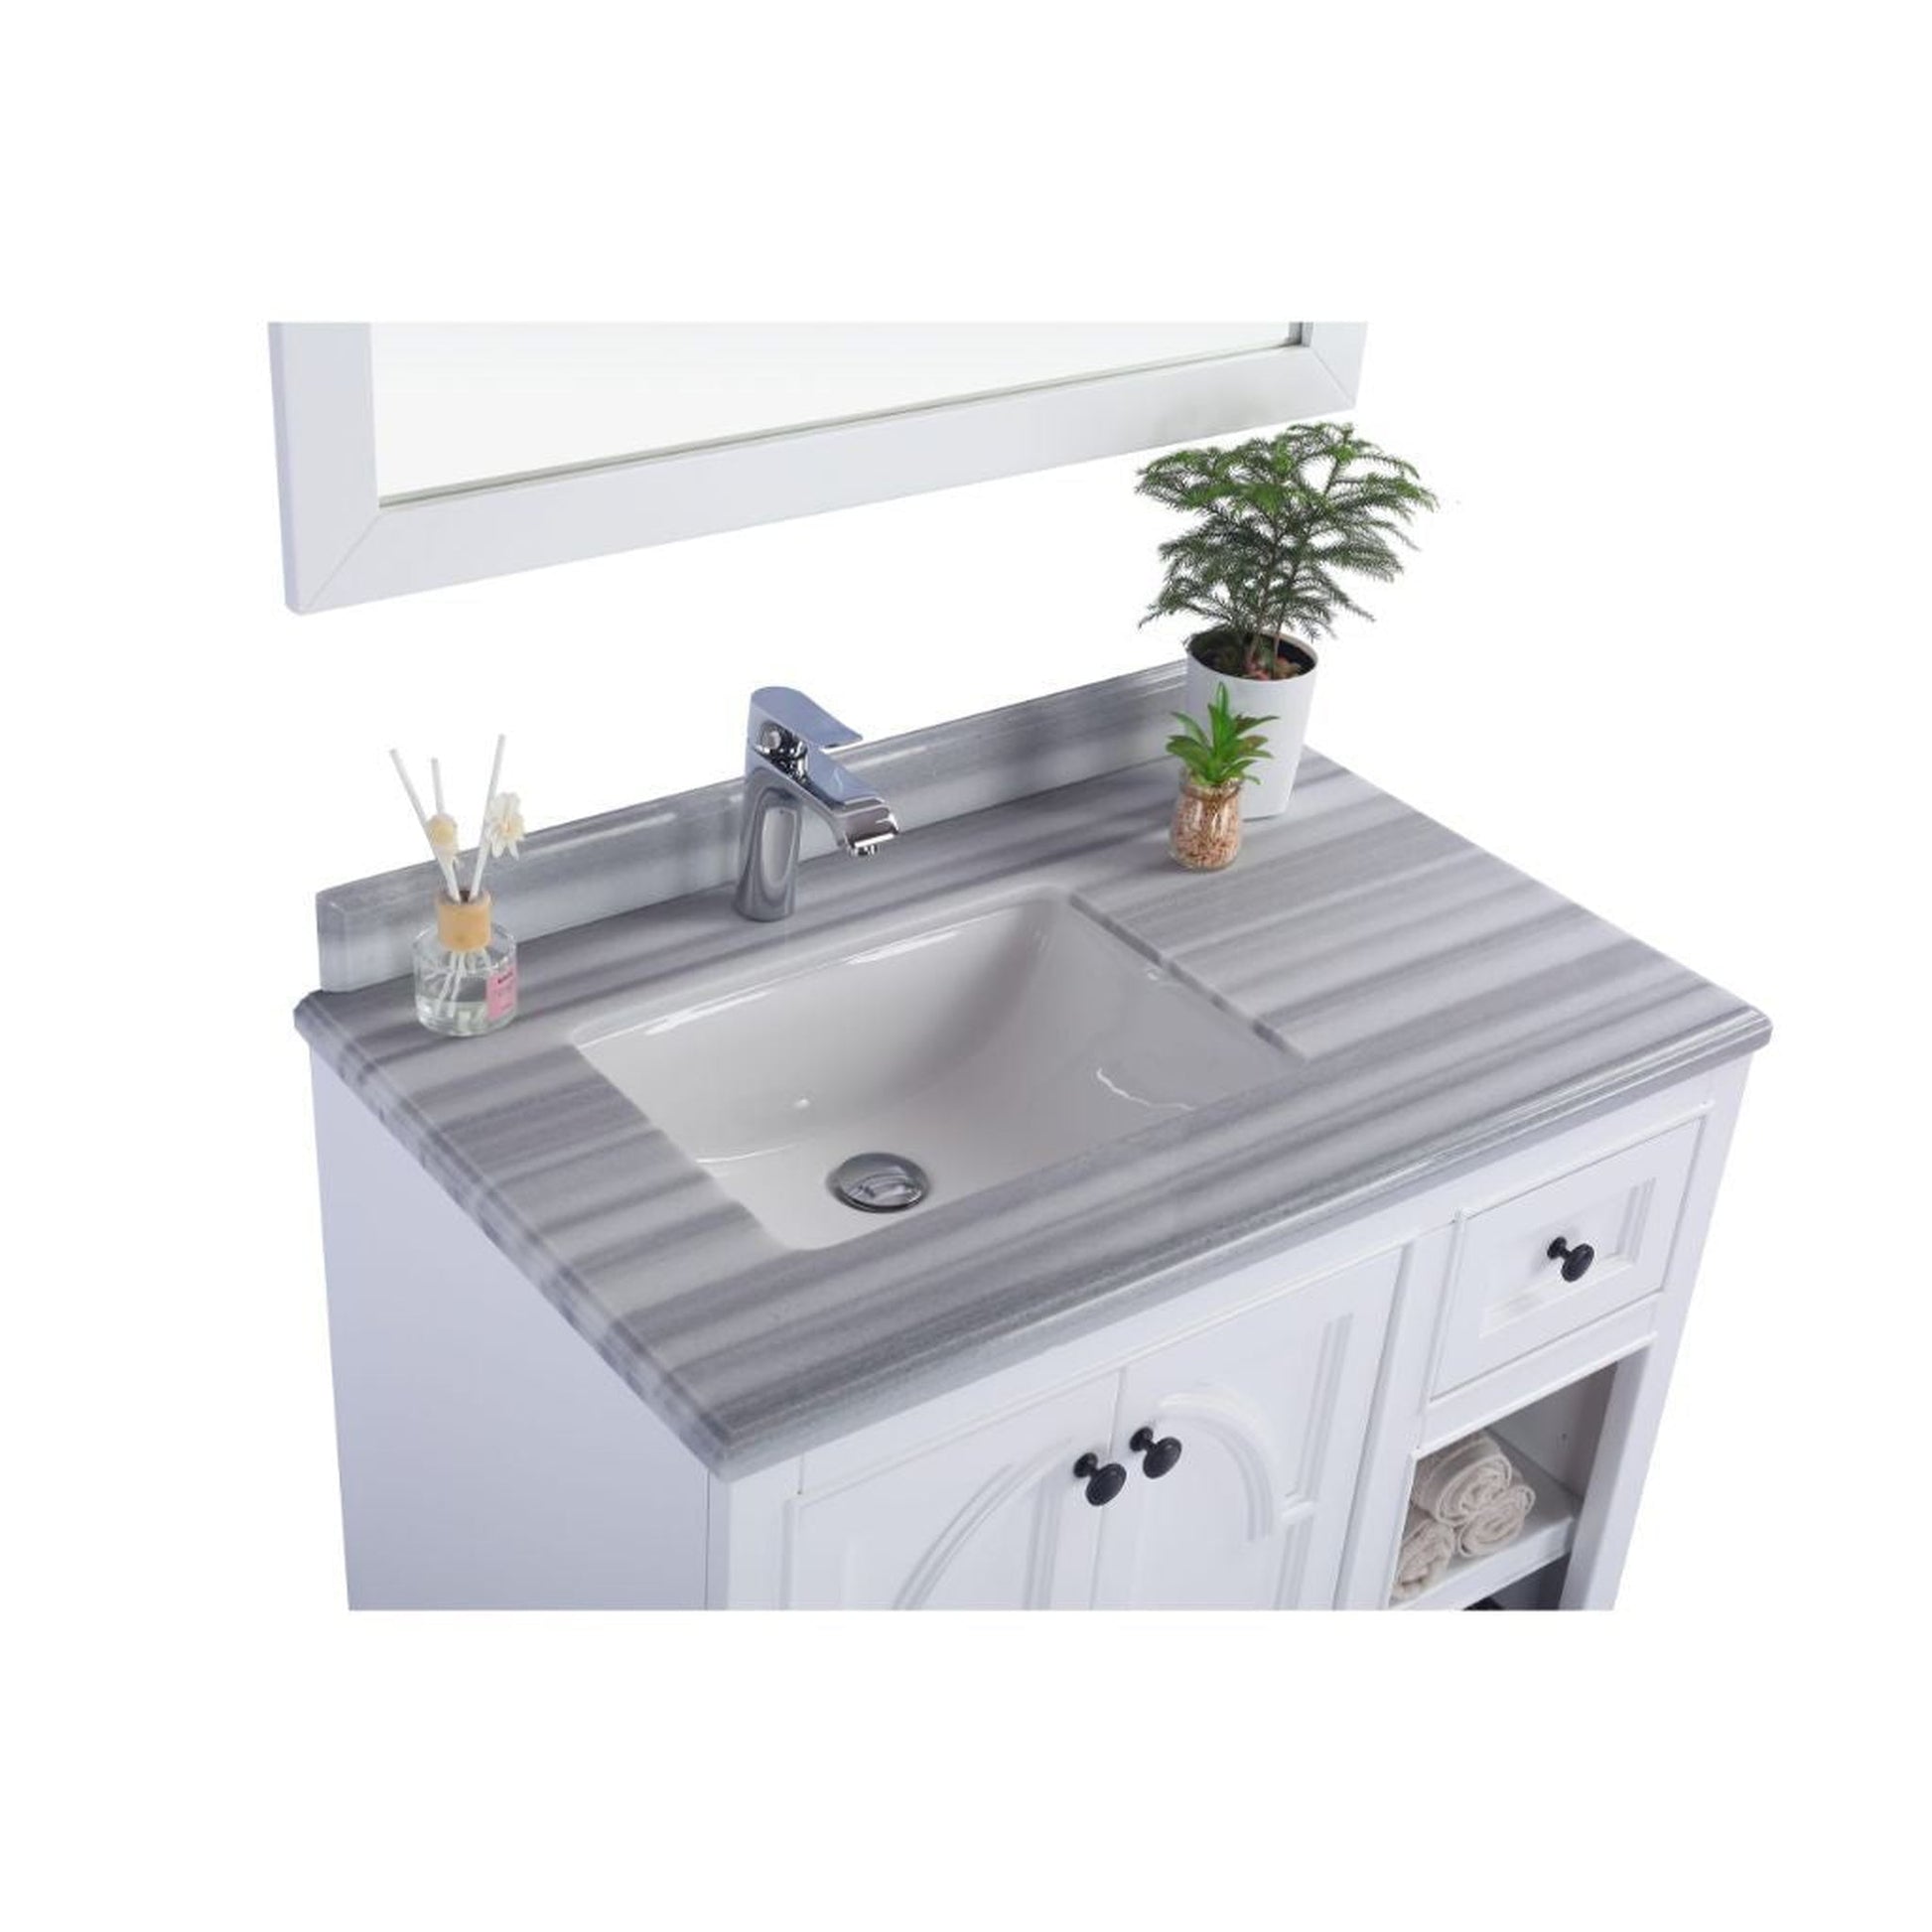 Laviva Odyssey 36" White Vanity Base and White Stripes Marble Countertop With Left Offset Rectangular Ceramic Sink